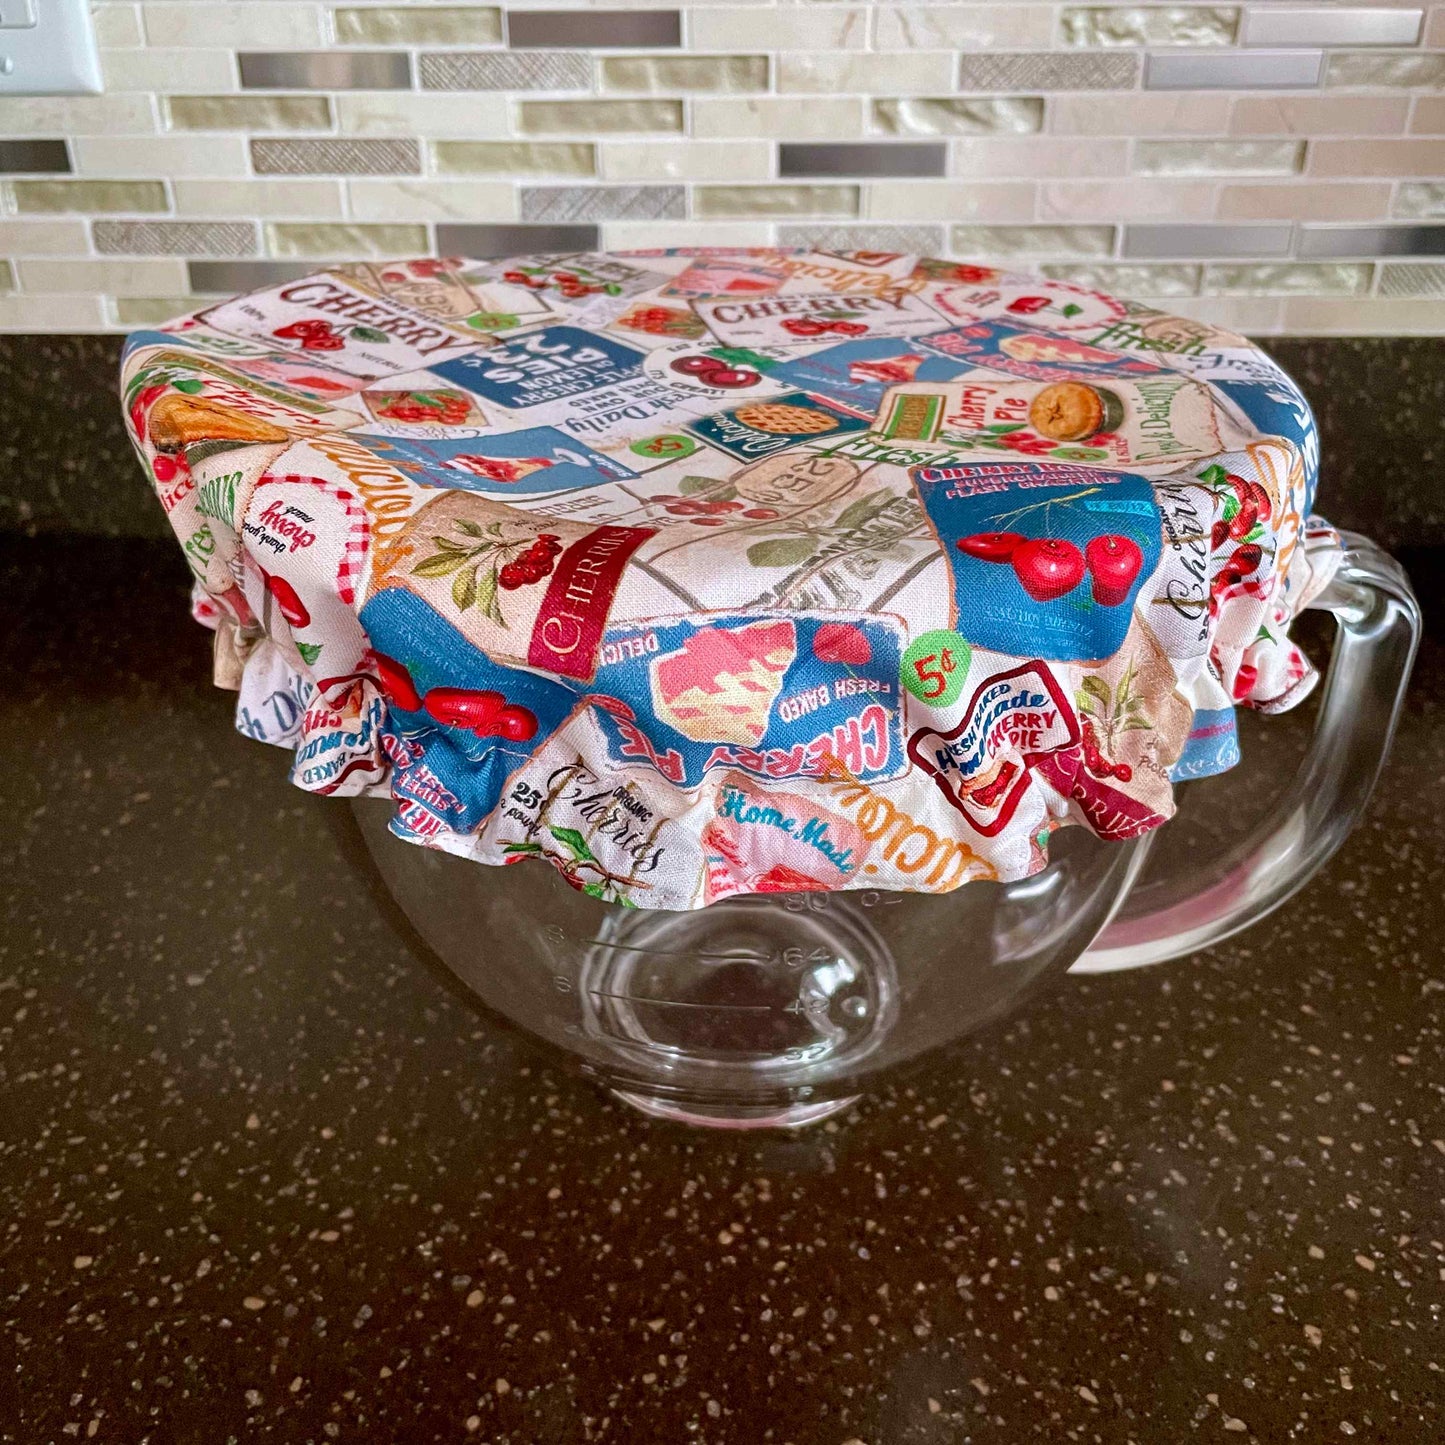 Stand Mixer Bowl Covers -  Cherry Pie